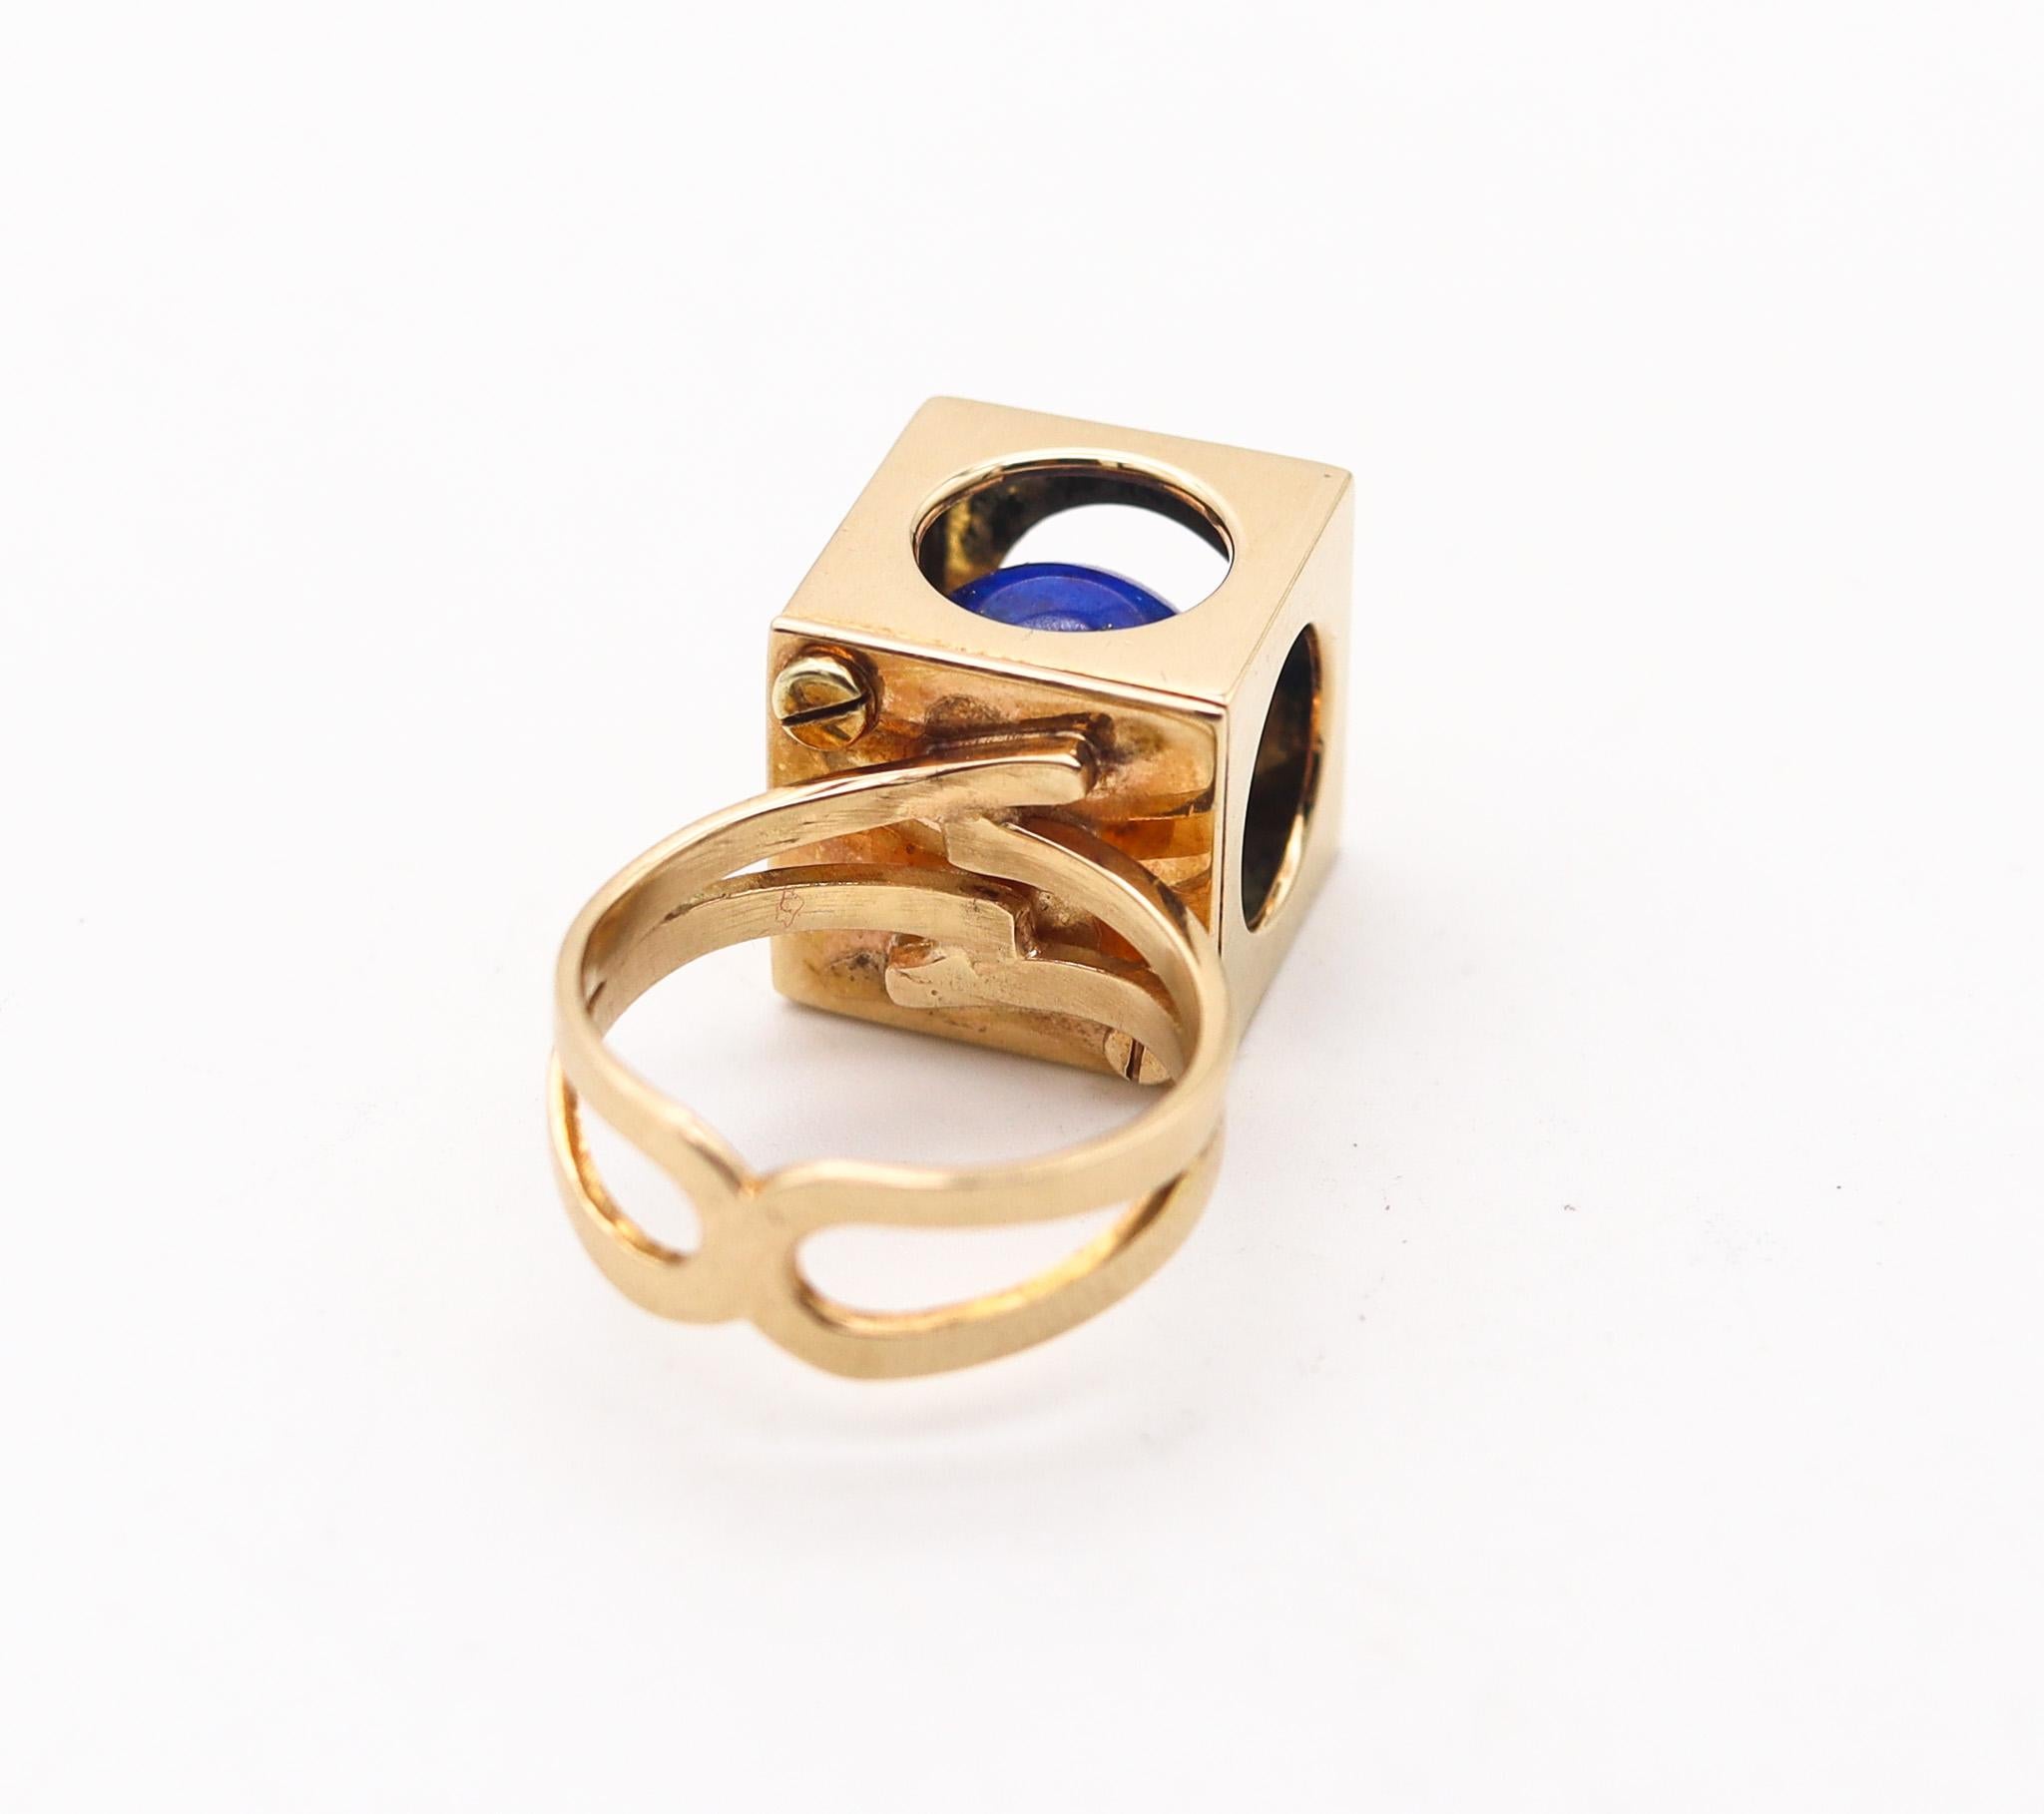 Bead European Modernist 1970 Sculptural Ring In 14Kt Yellow Gold With Lapis Lazuli